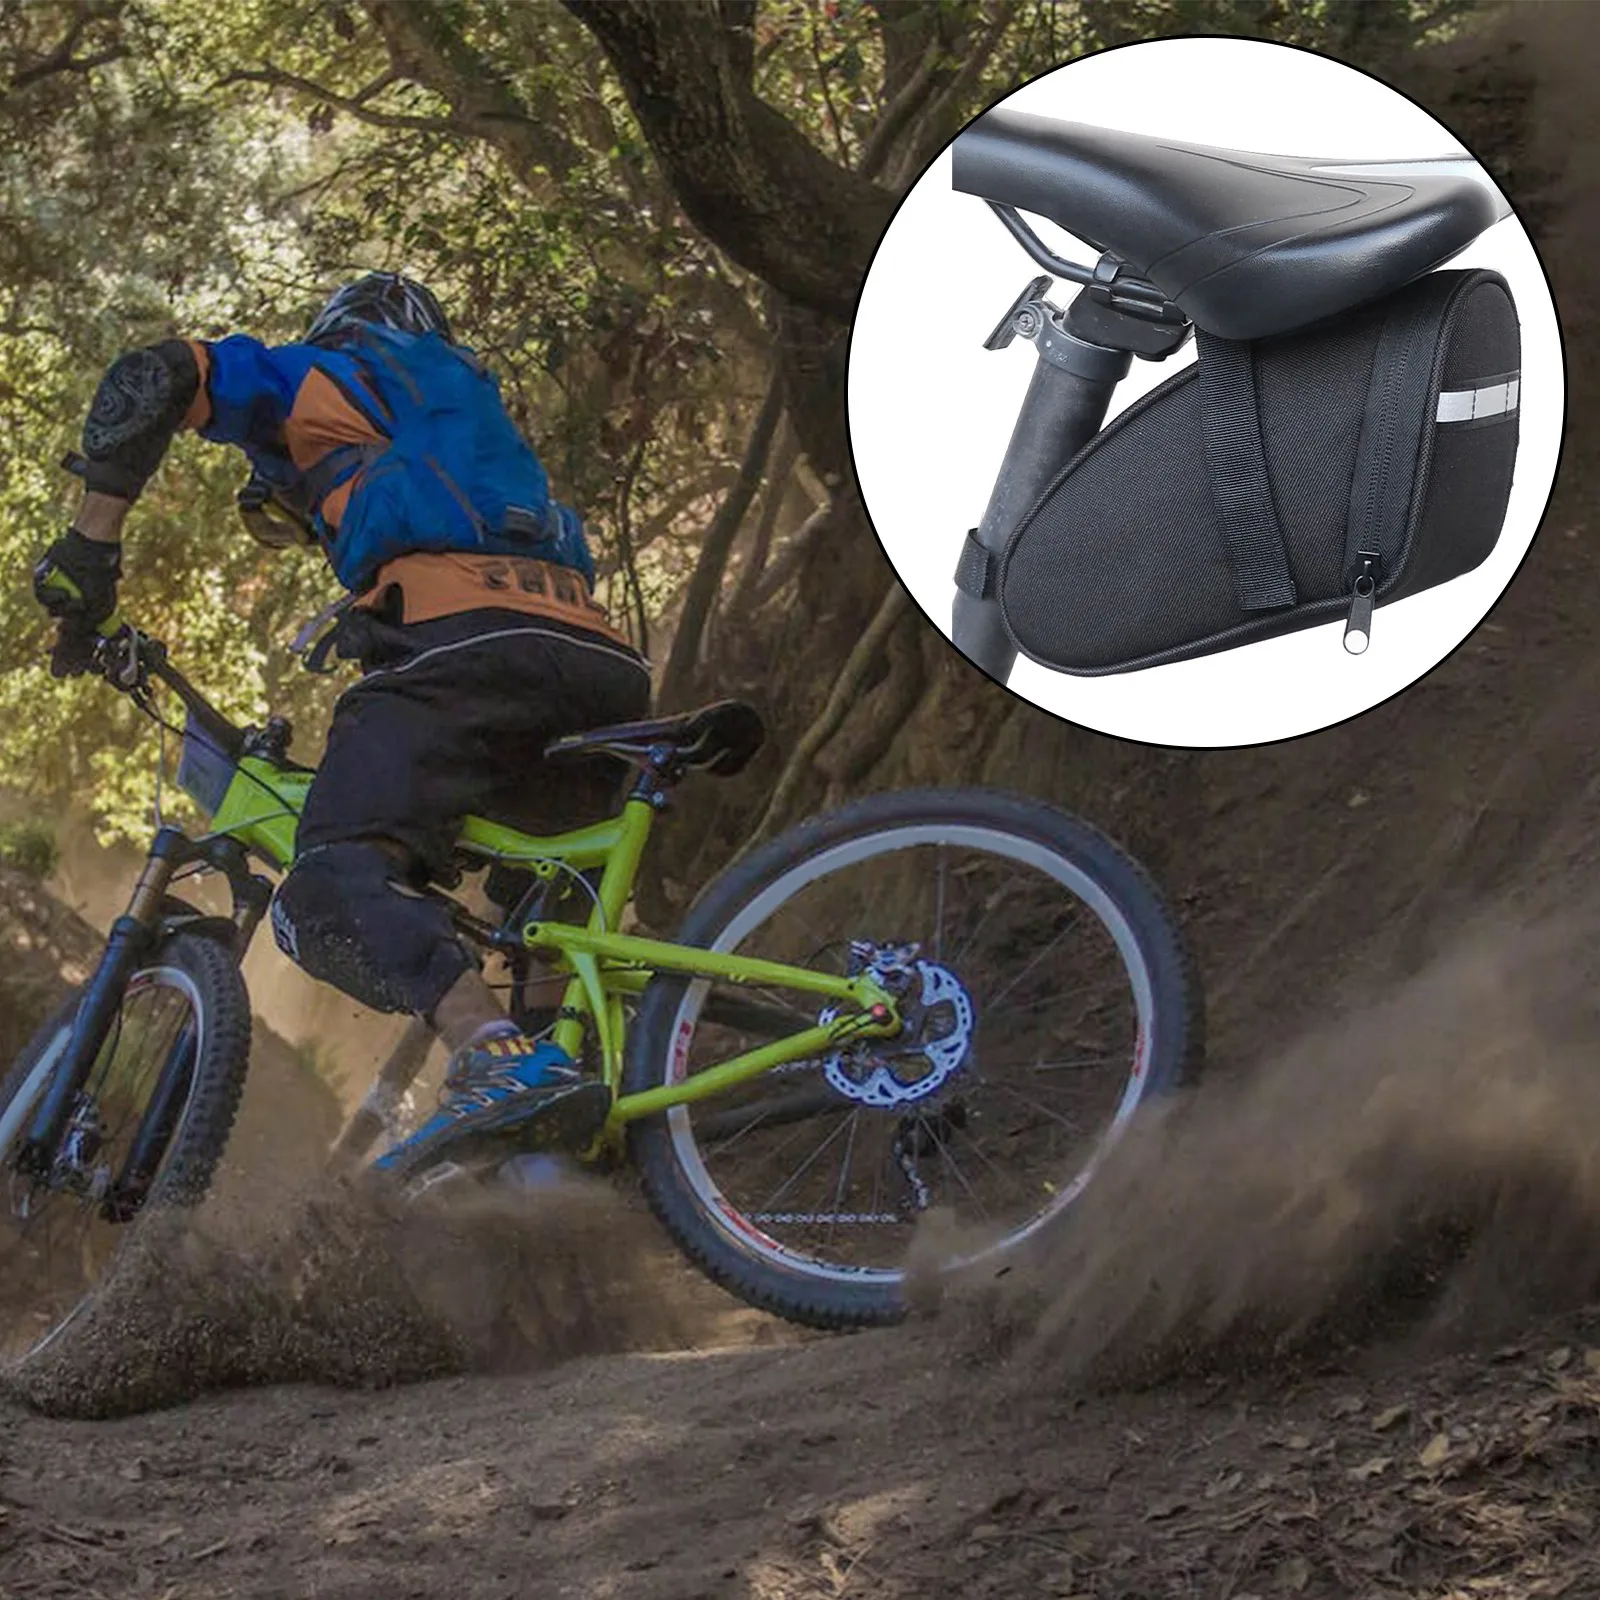 

Bicycle Bag Bike Saddle Bag Cycling Seat Tail Pouch Under SeatPacks Seatpost Storage Bag Pannier Backpack Bicycle Accessories